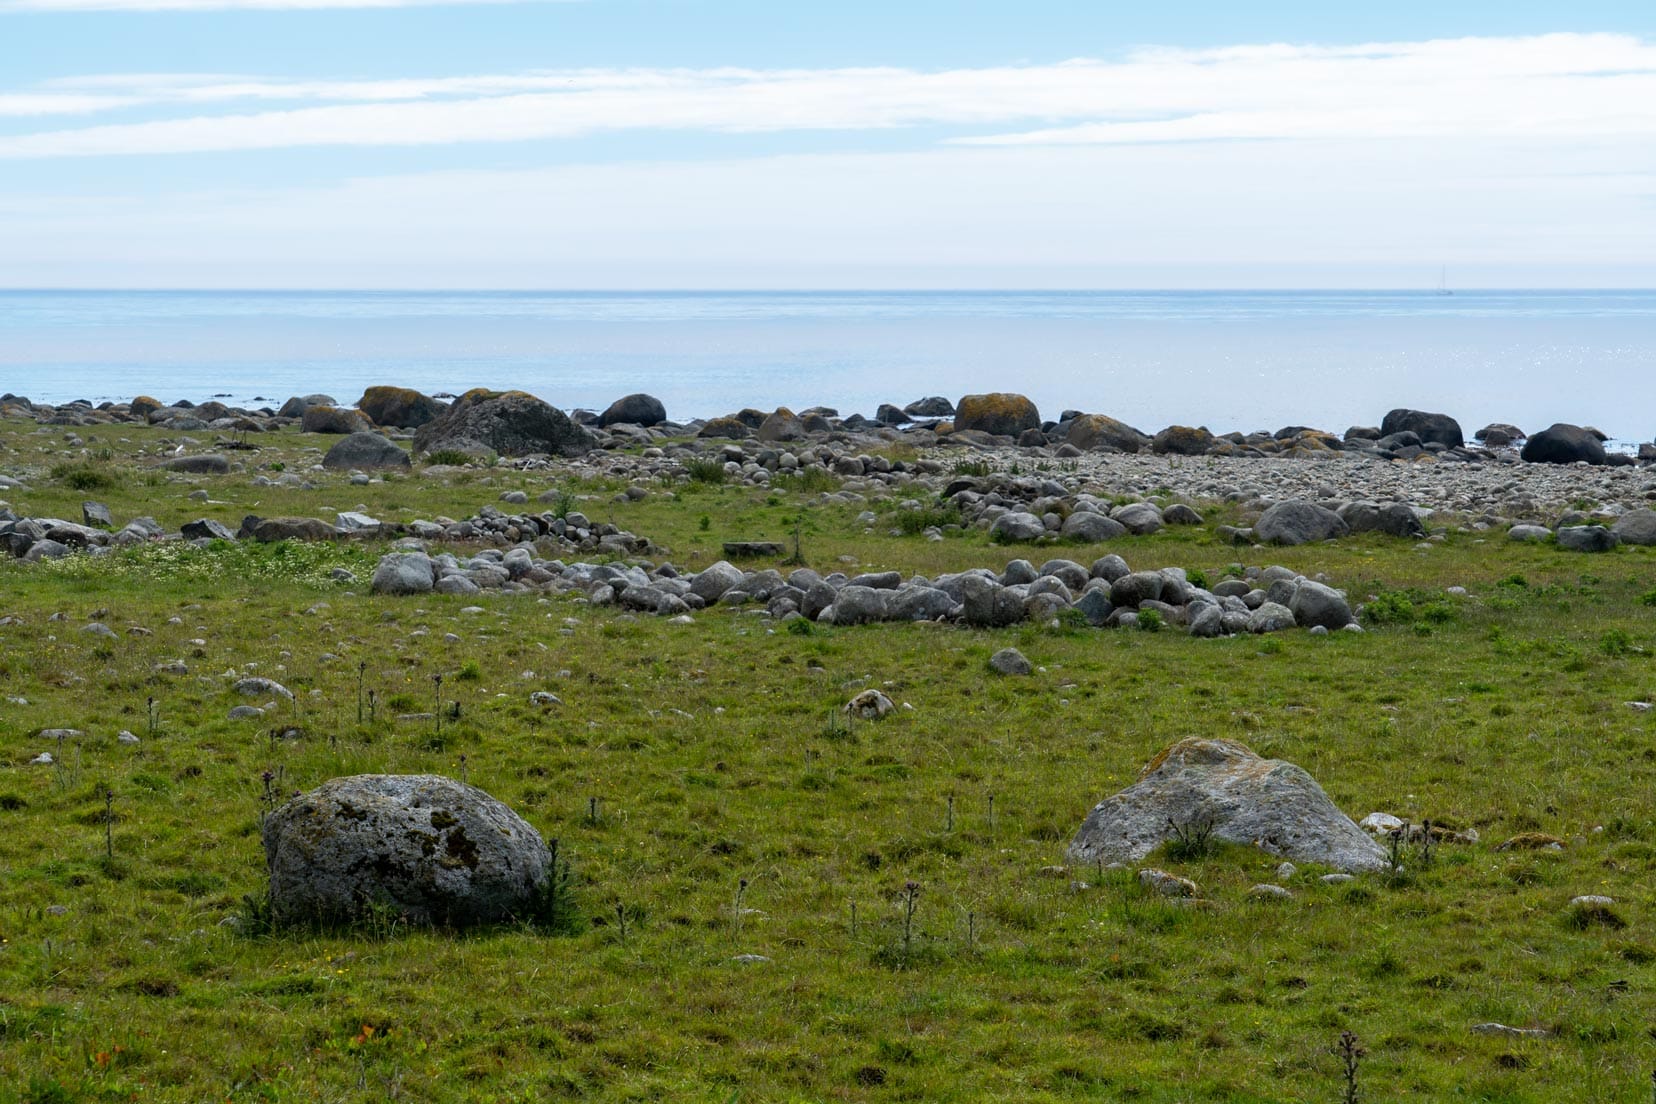 Old burial grounds and ancient settlement - granite stones set out on the grass near the shore